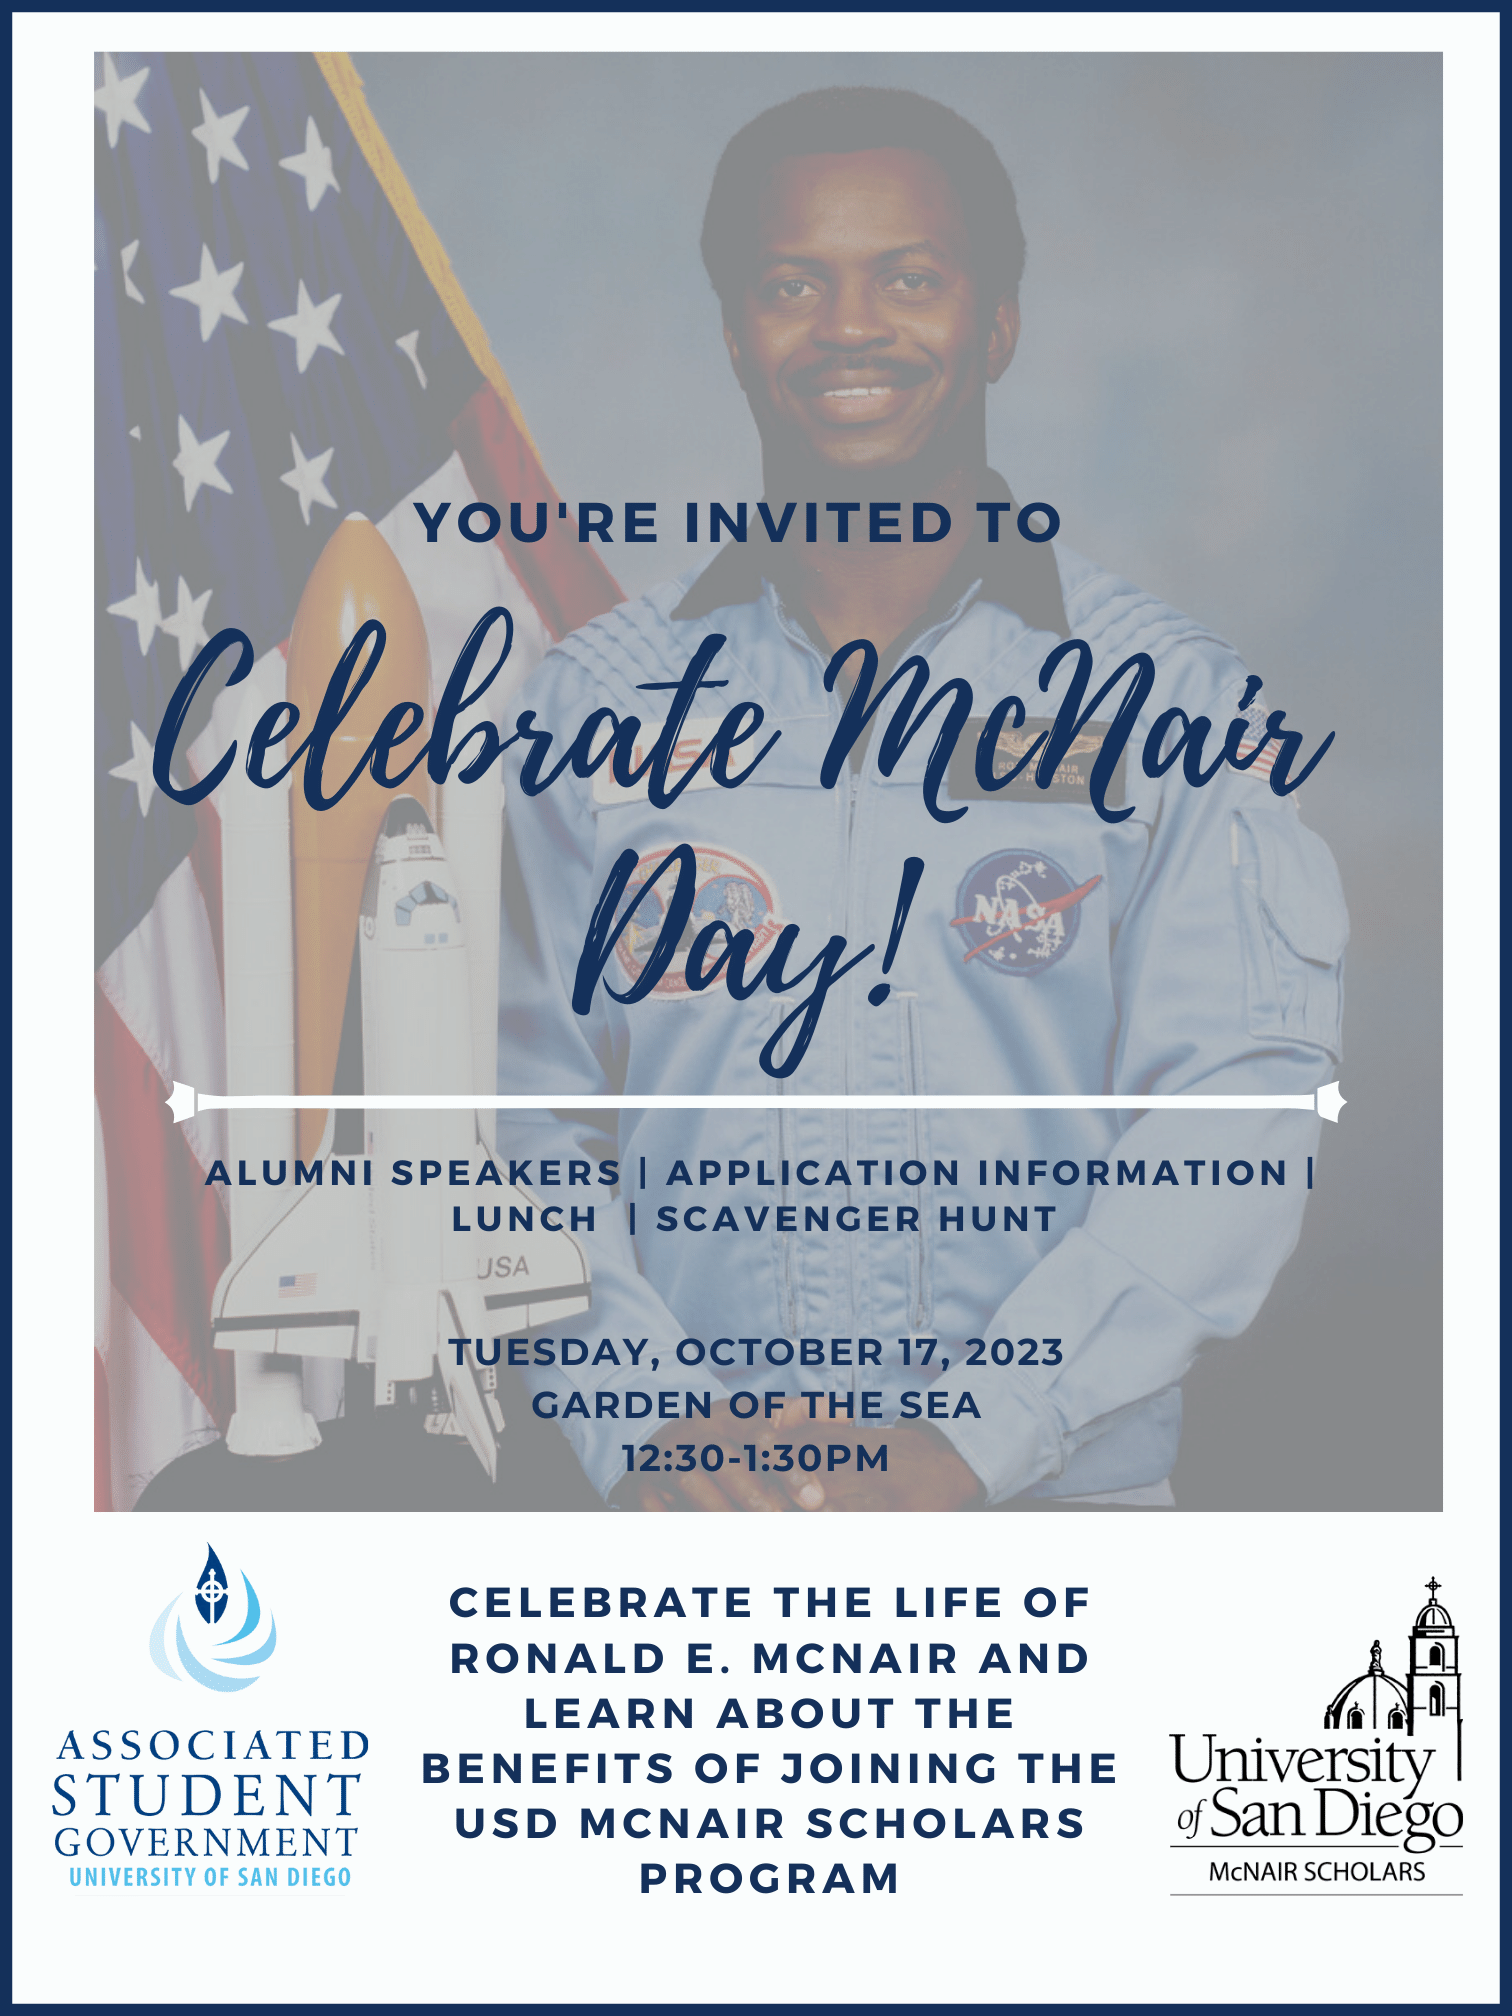 Photo detailing McNair Day celebration that will be held on Tuesday, October 17, 2023 at Garden of the Sea from 12:30-1:30PM.